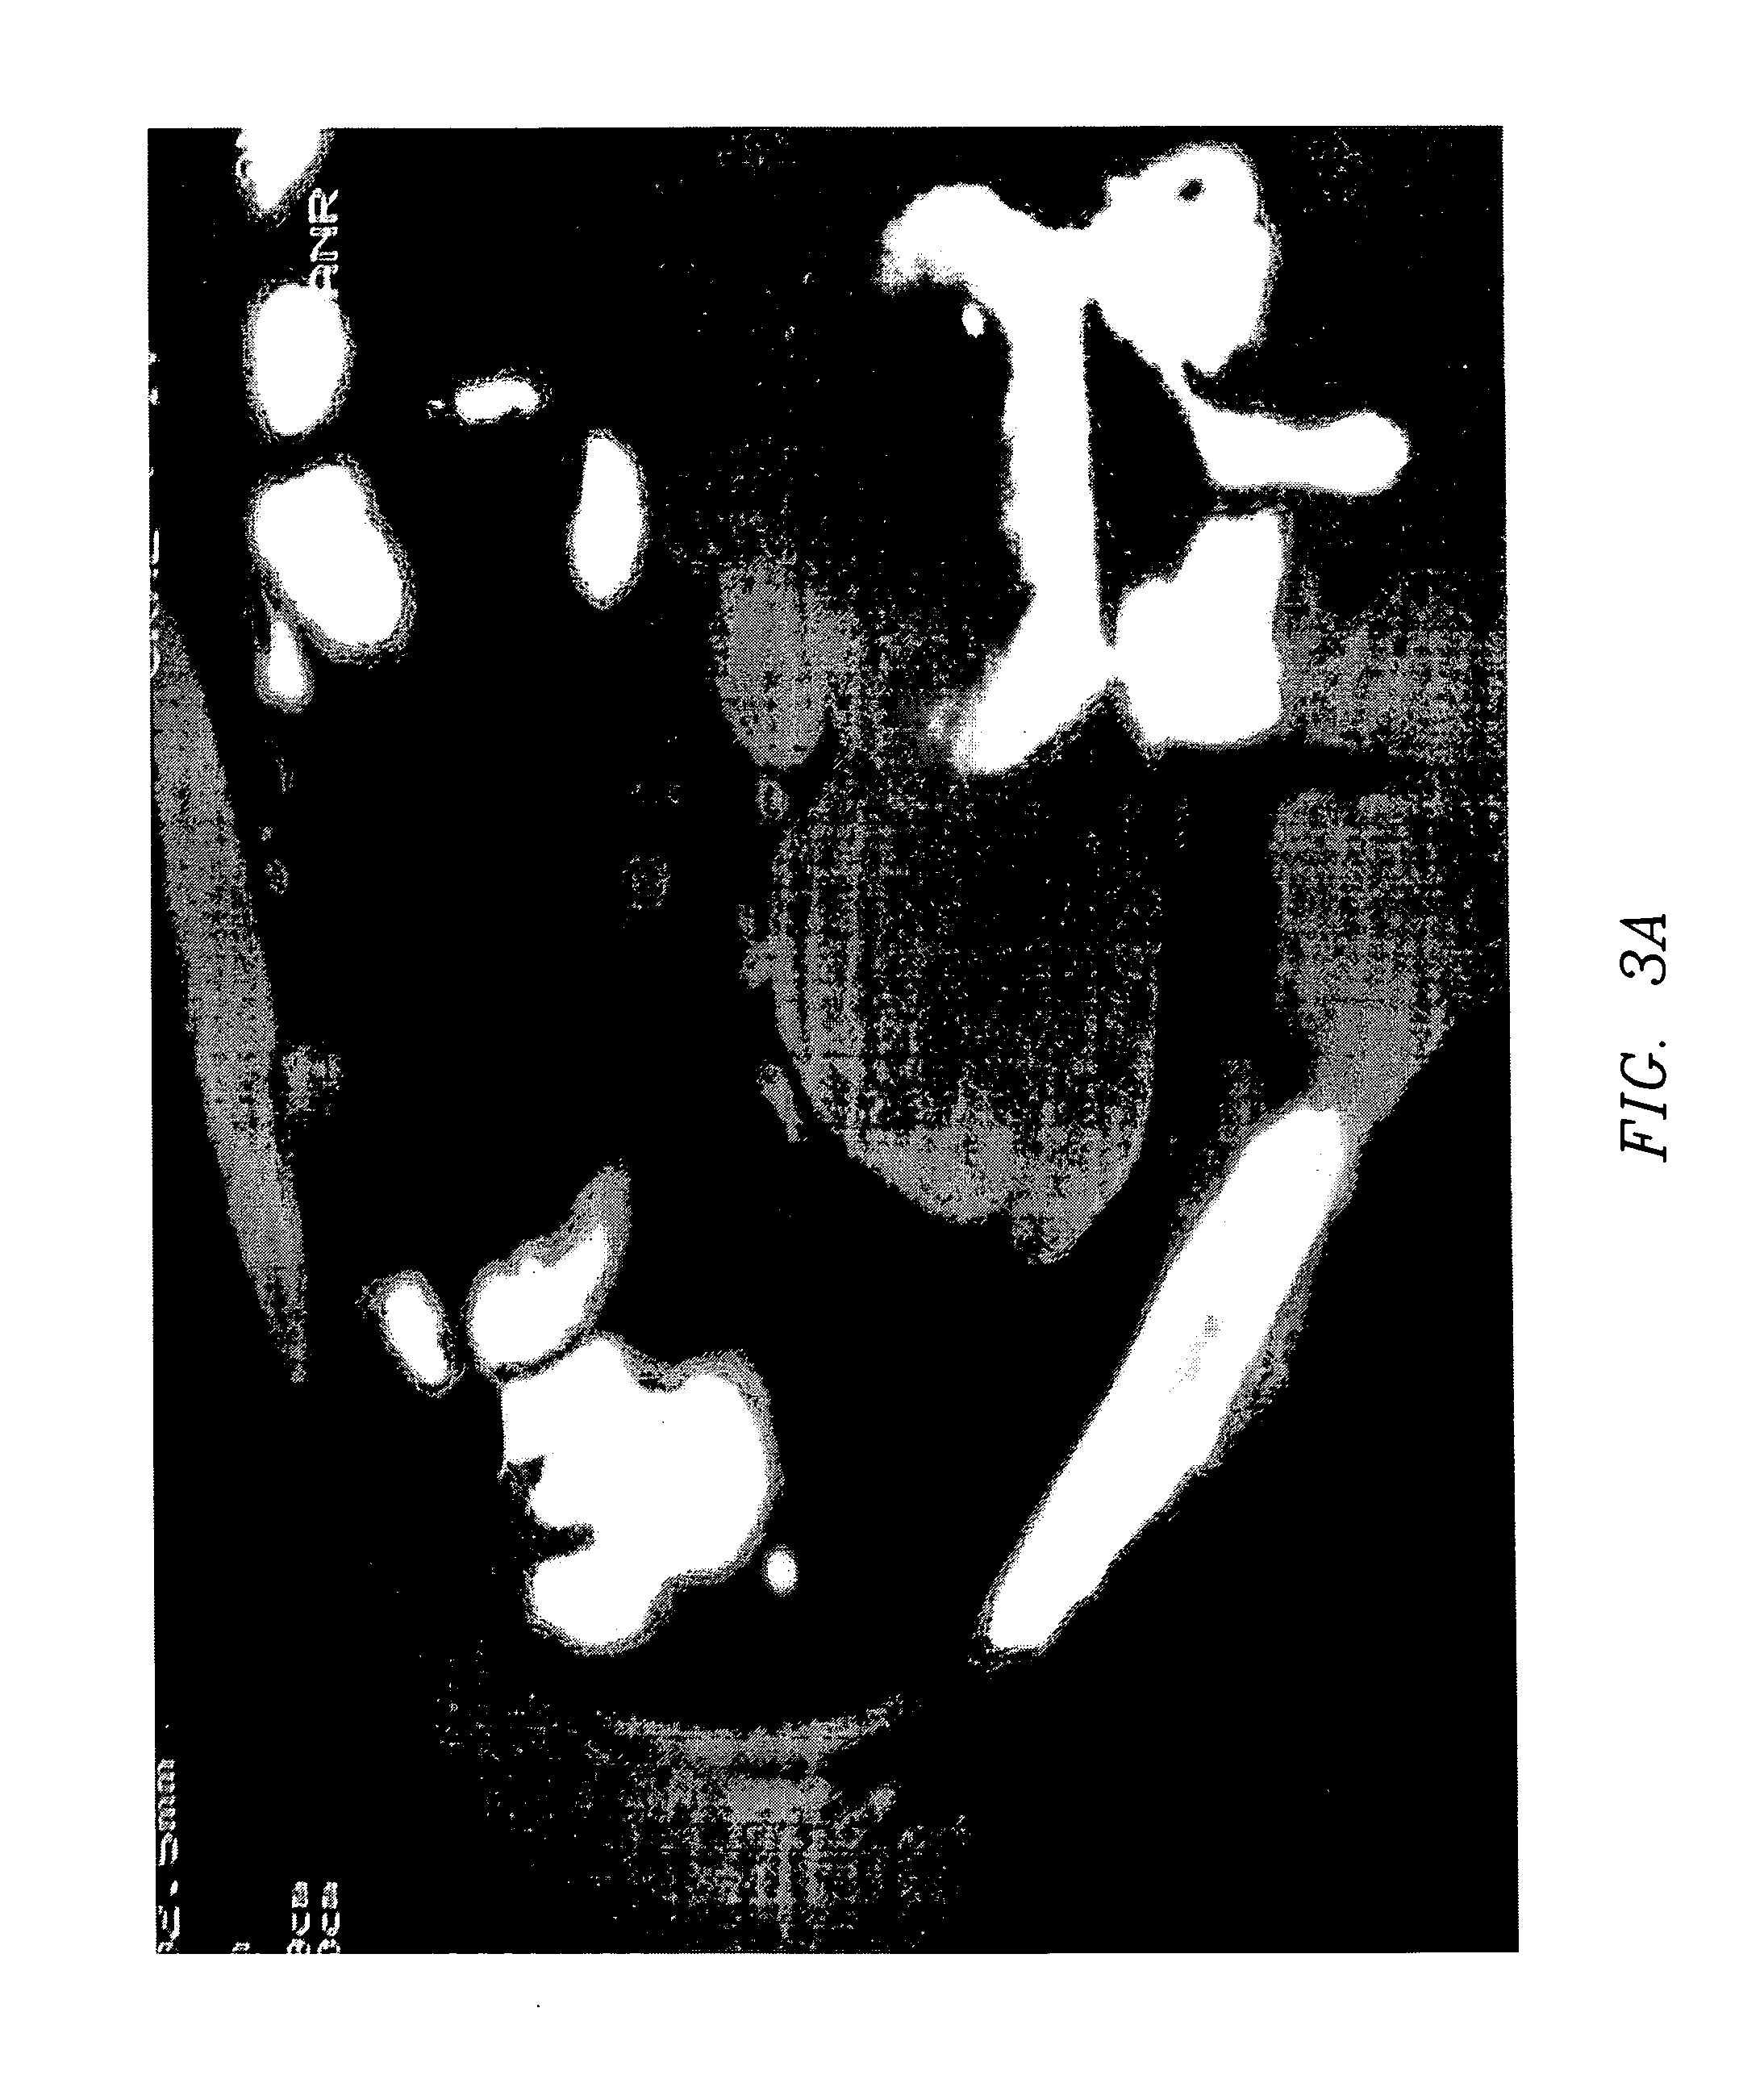 Composition and method for direct visualization of the human appendix